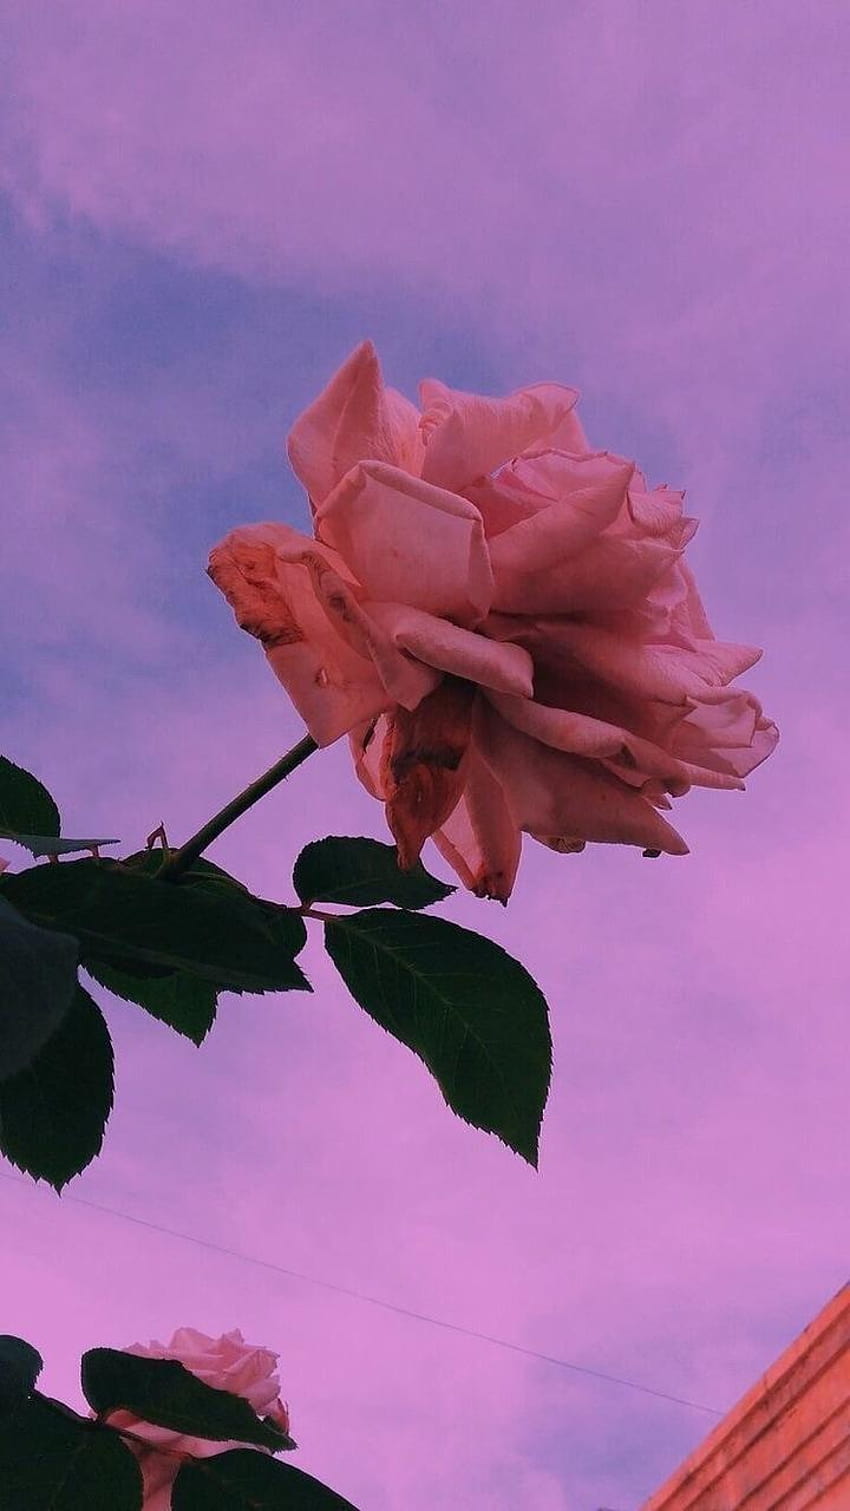 About graphy in A E S T H E T I C by pinkroses, aesthetic pink roses HD ...